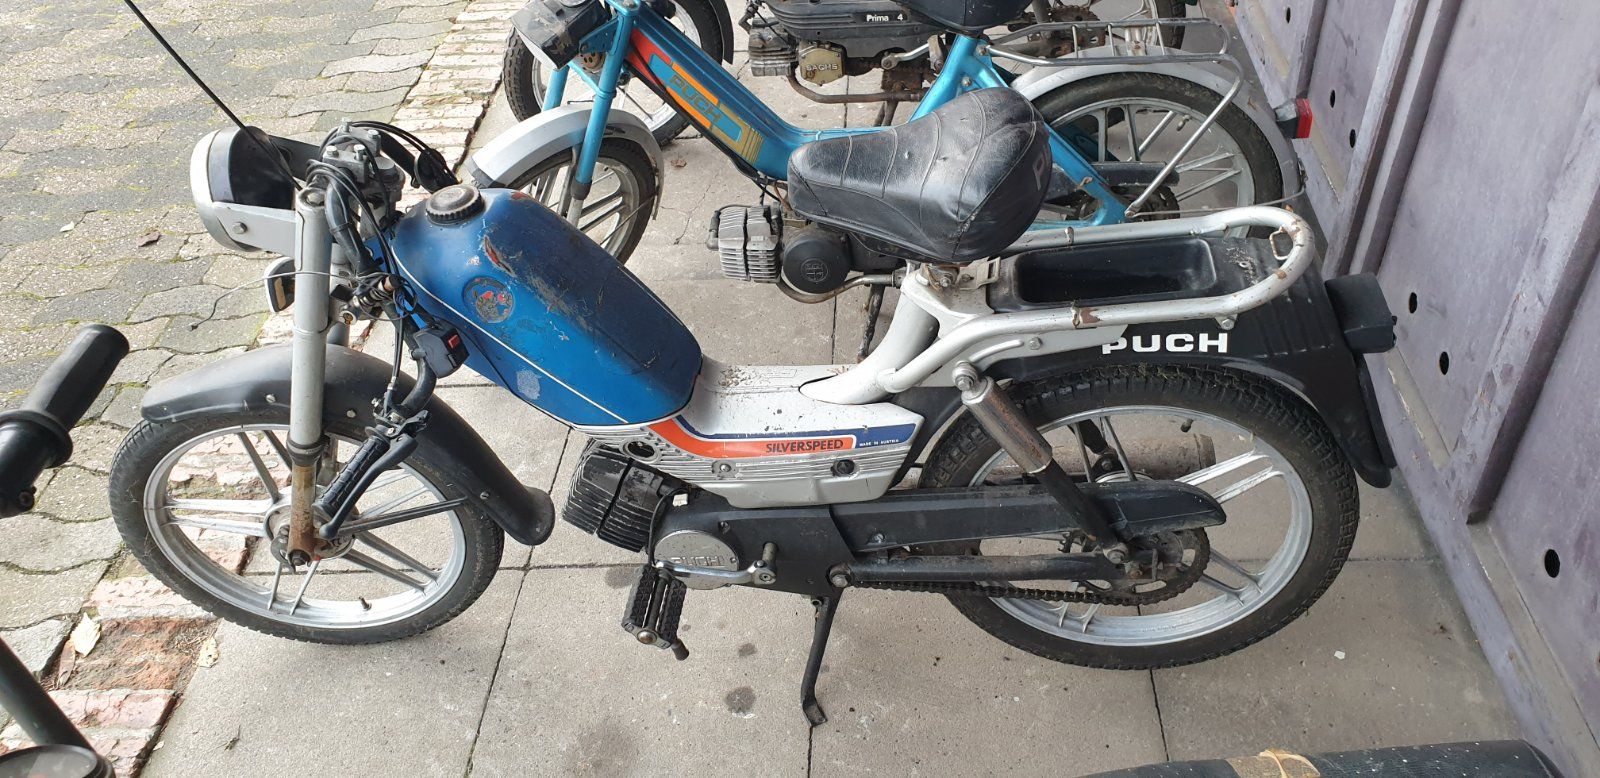 Puch X50-2M Oldtimer-Mofa Silverspeed